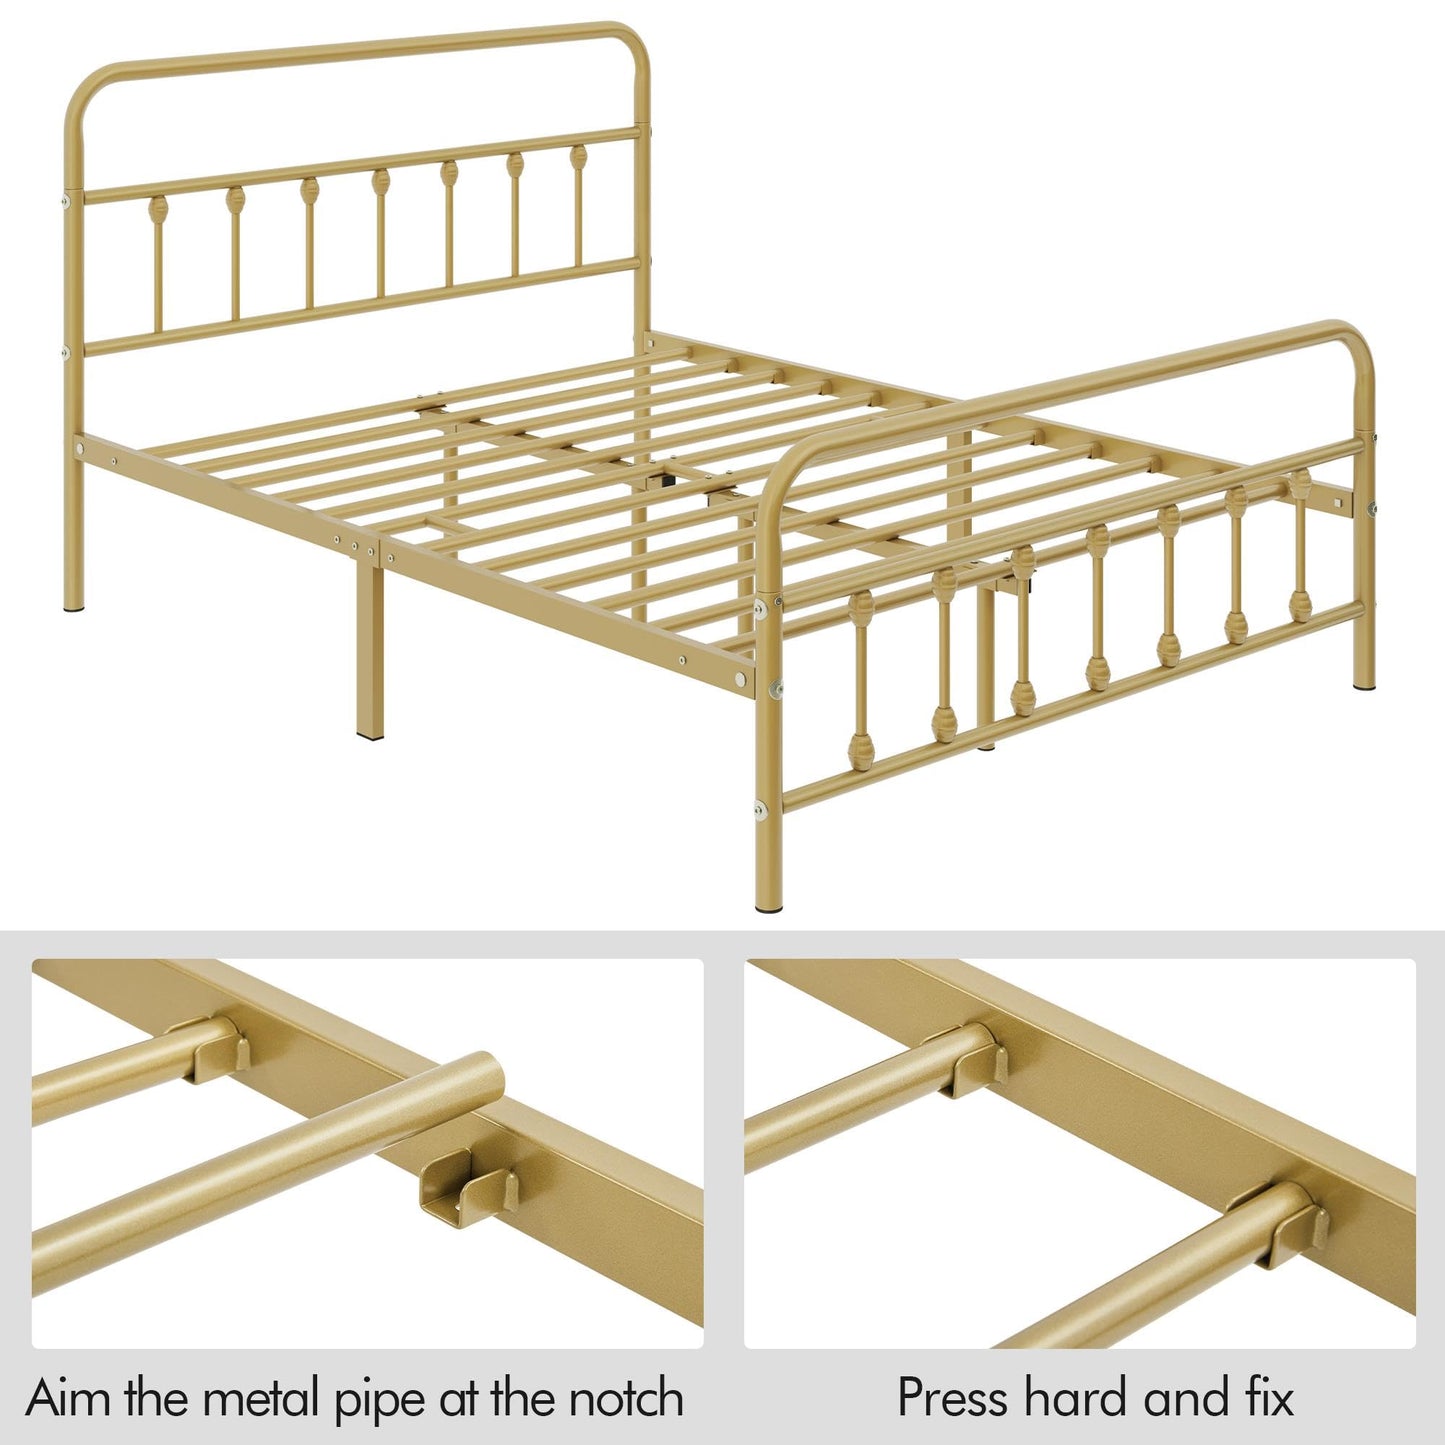 Yaheetech Classic Metal Platform Bed Frame Mattress Foundation with Victorian Style Iron-Art Headboard/Footboard/Under Bed Storage/No Box Spring